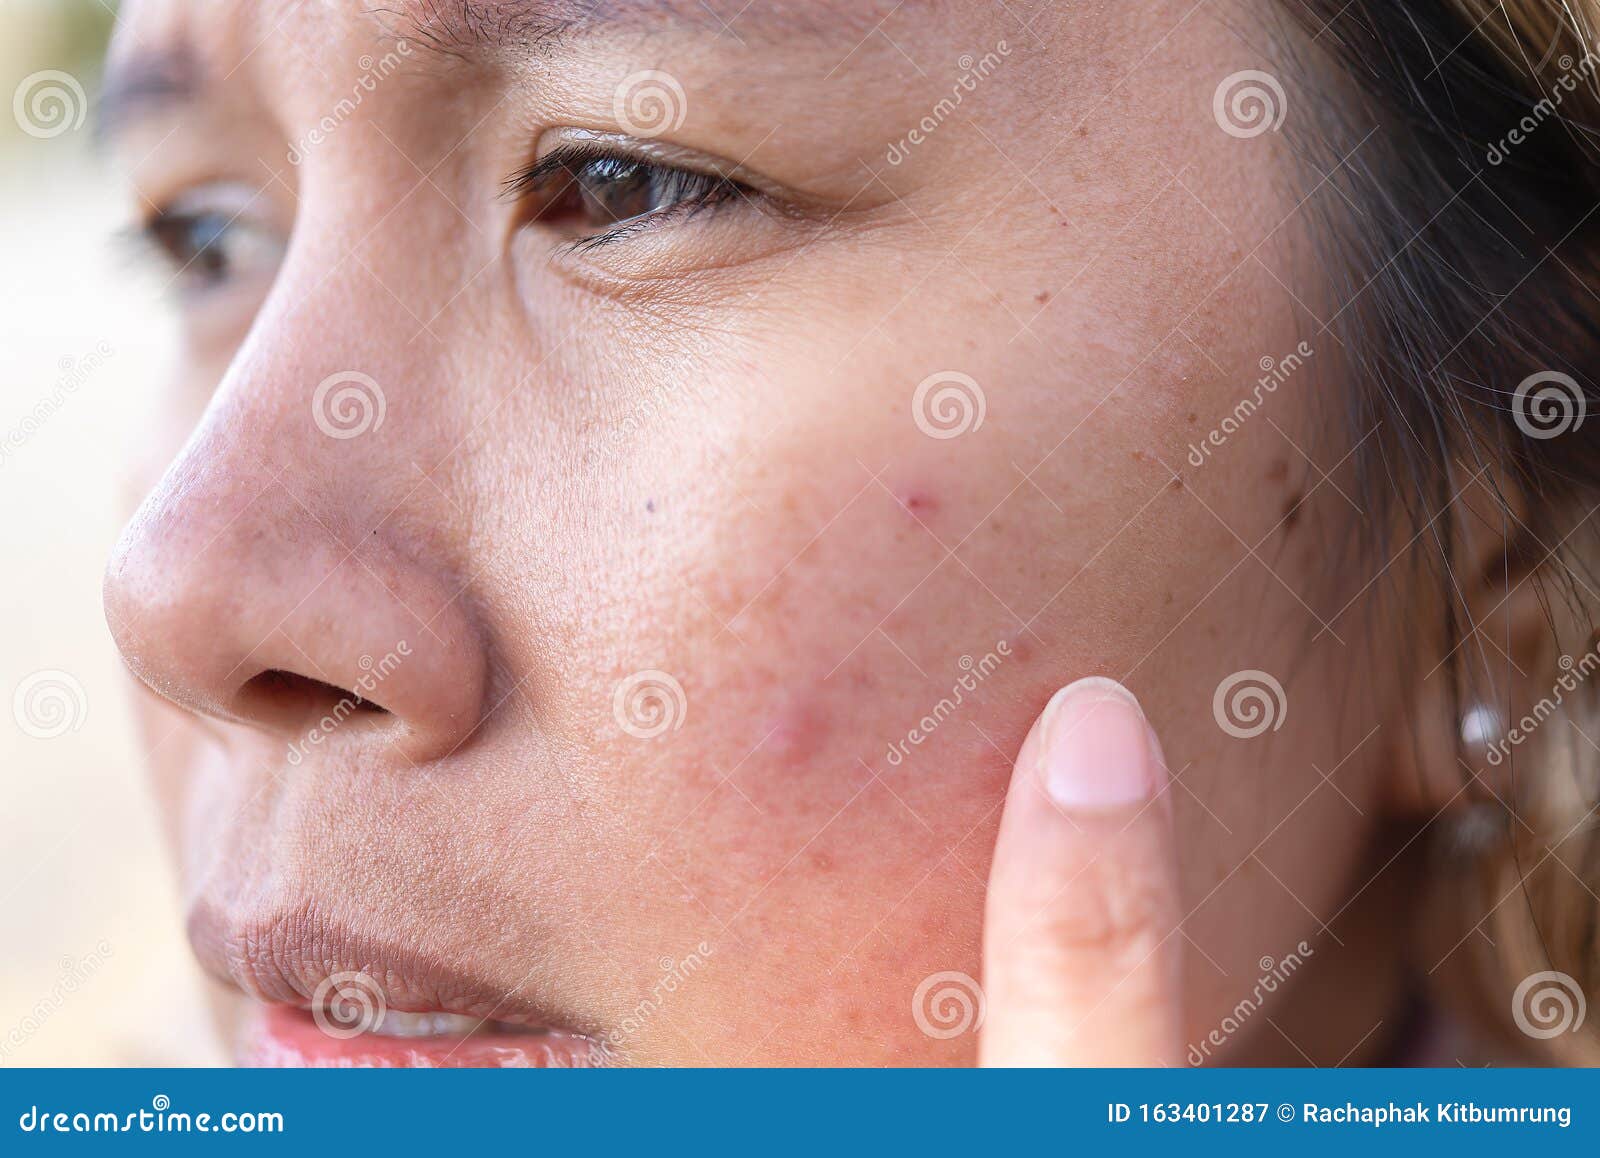 close up of women freckle, dark spot on face, dried skin issues, need treatment. asian middle age women